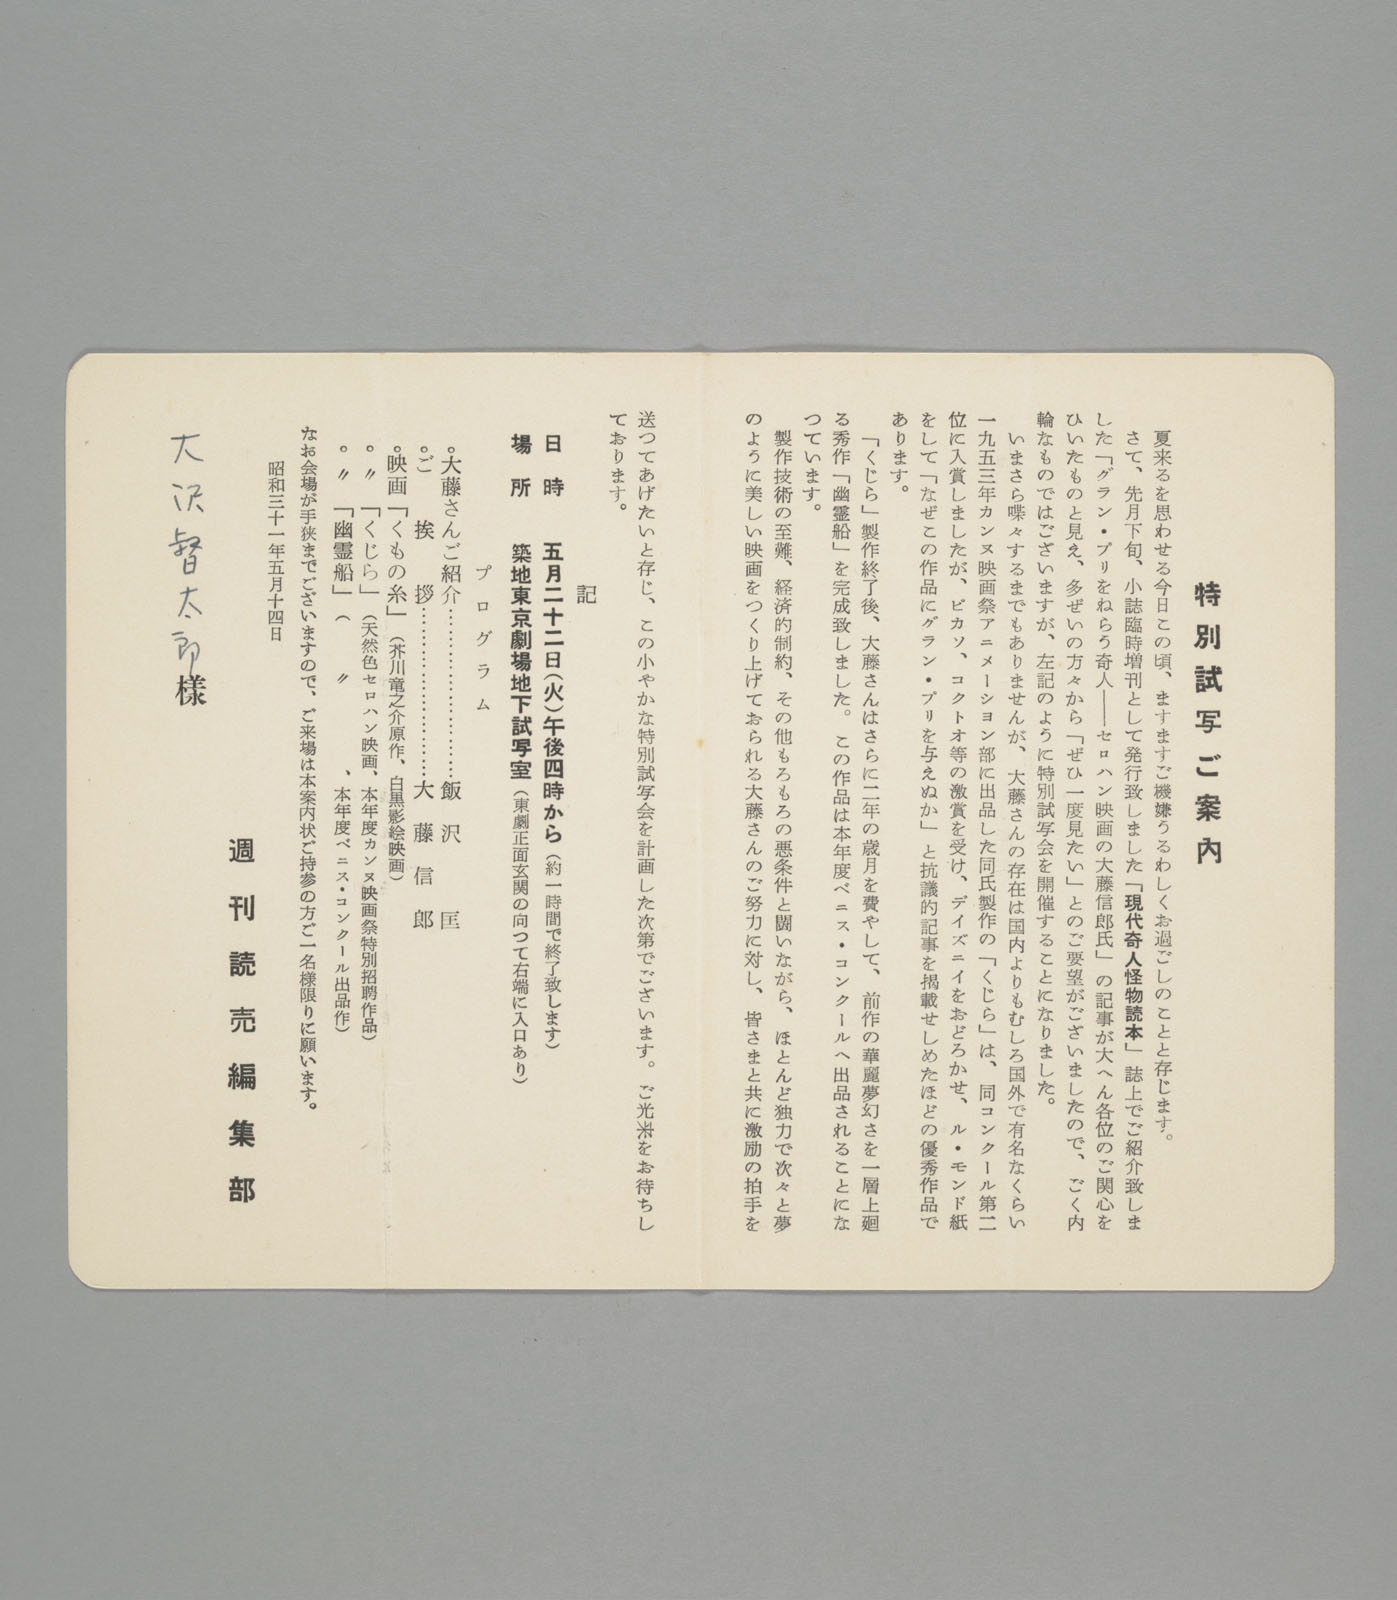 Invitation card for a special screening of Ofuji's works (1956)